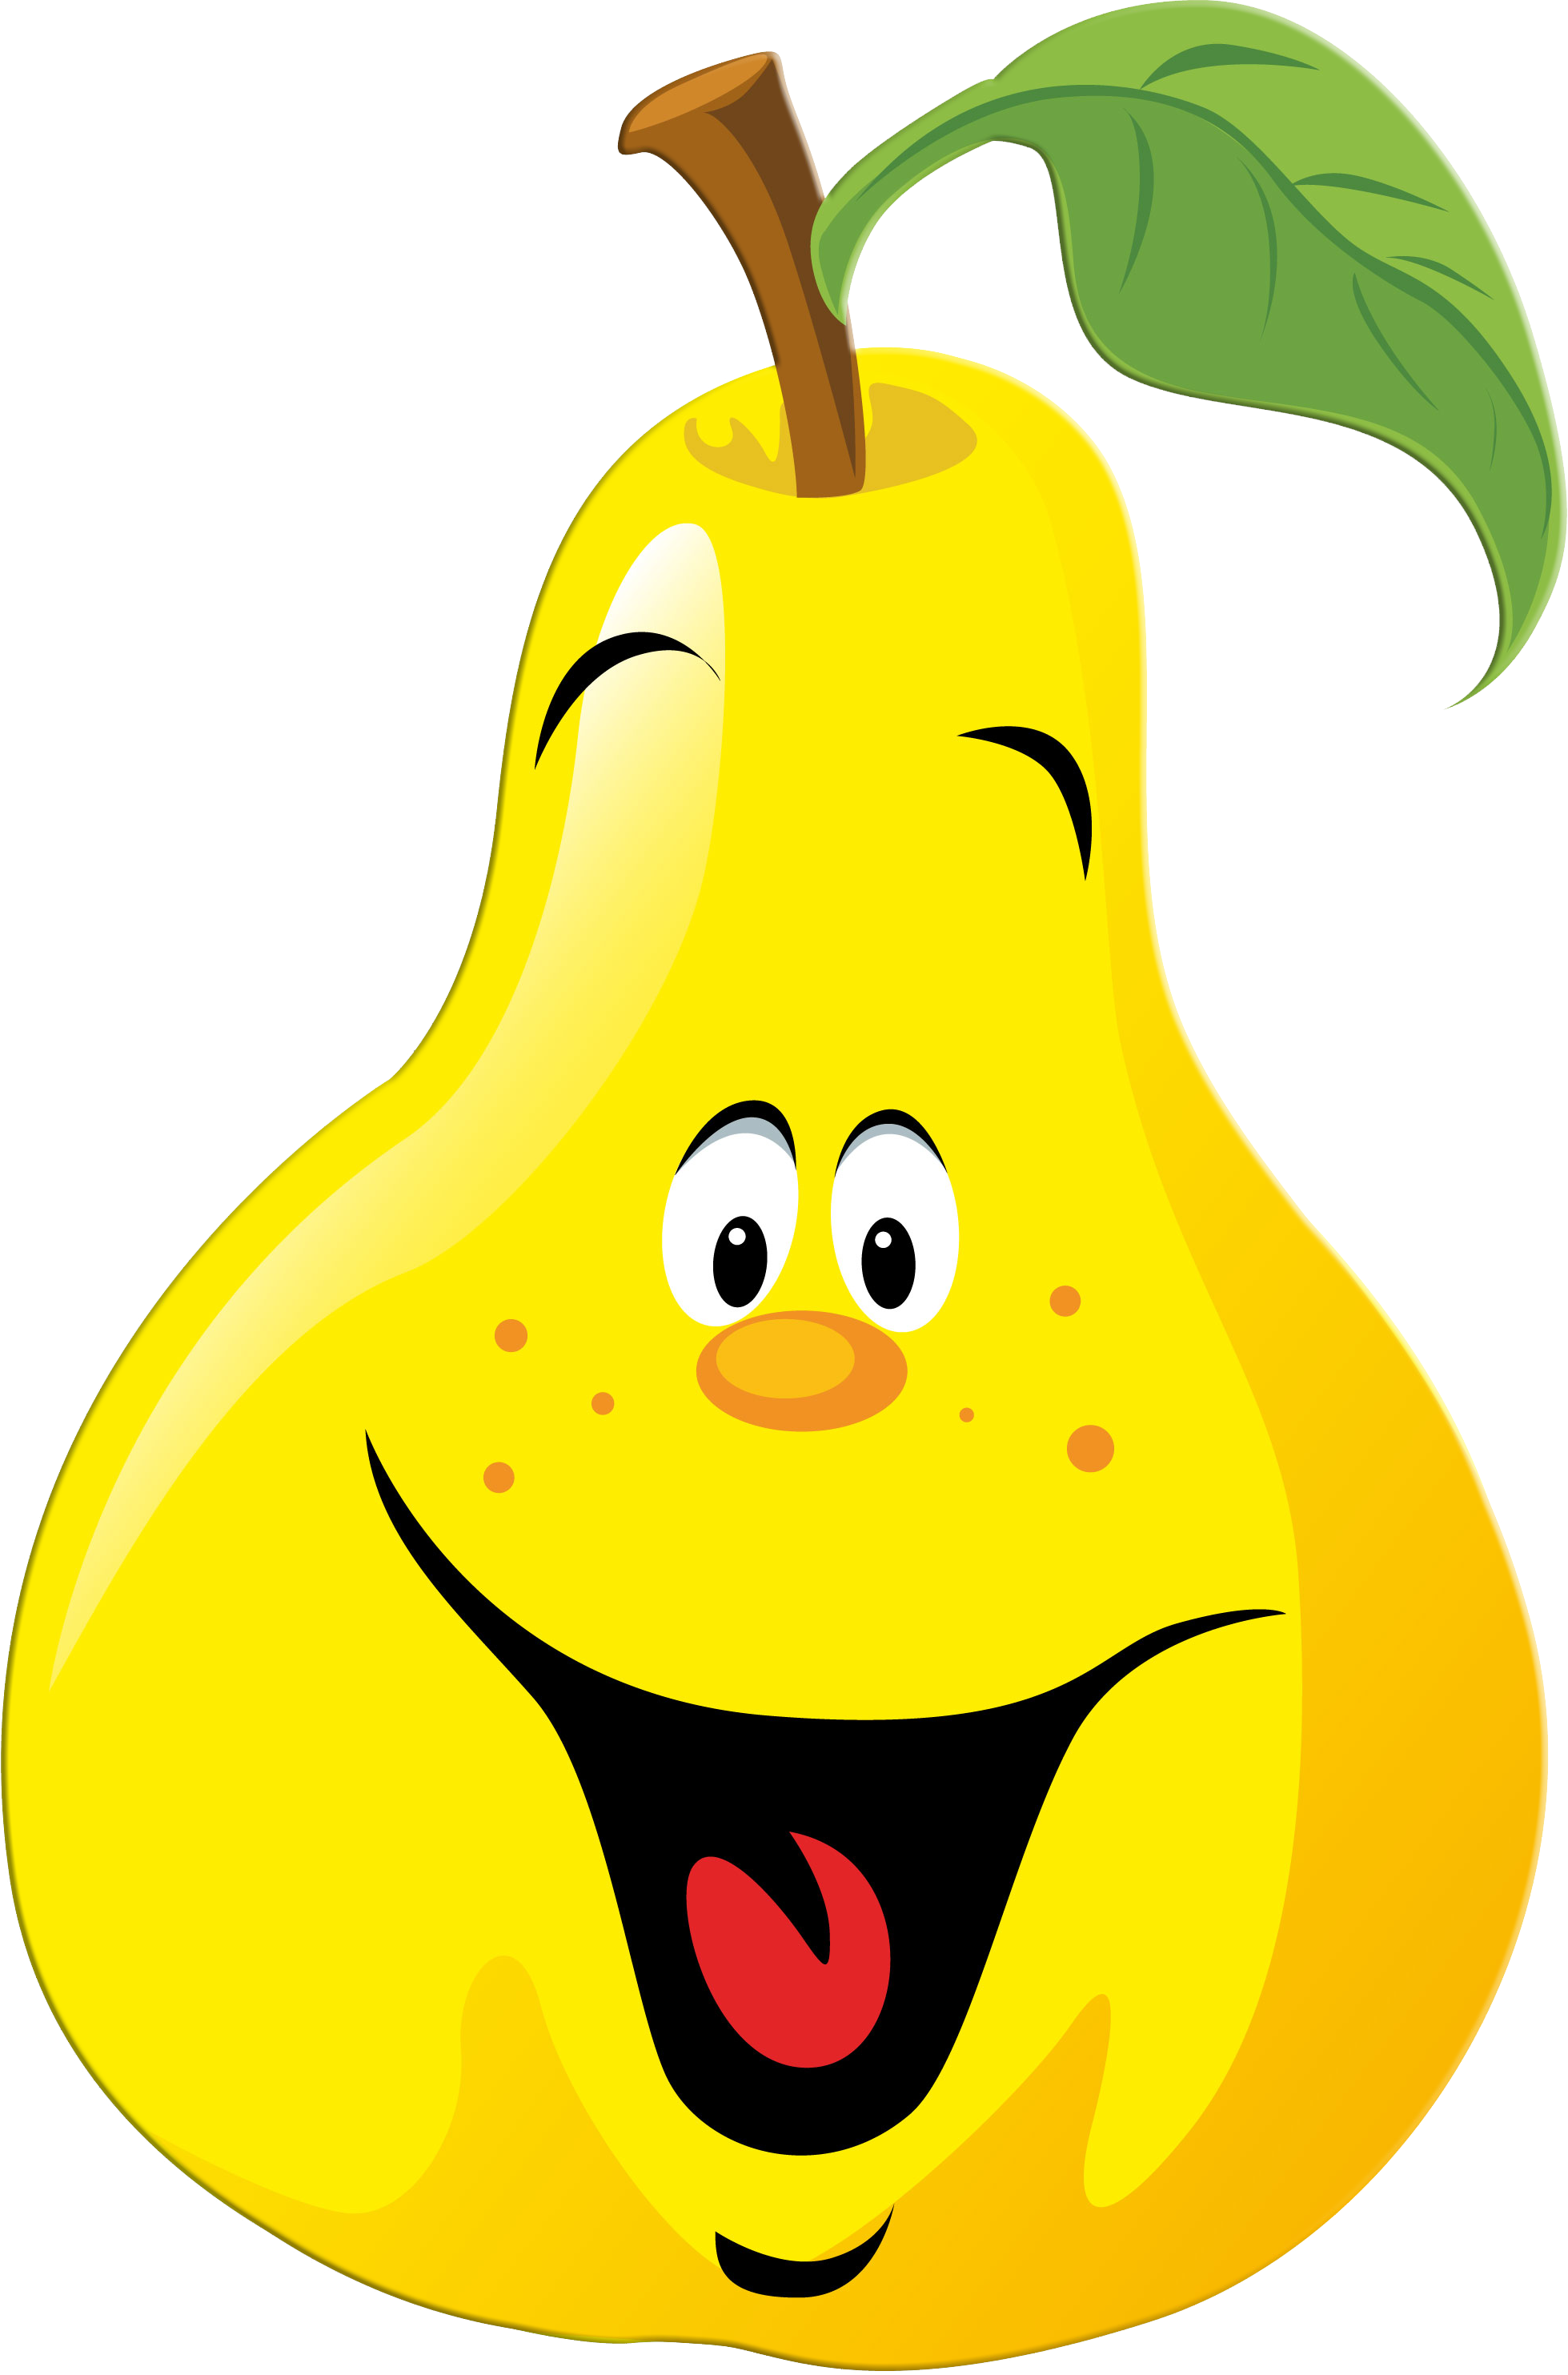 Http img fotki yandex. Fruits clipart cereal